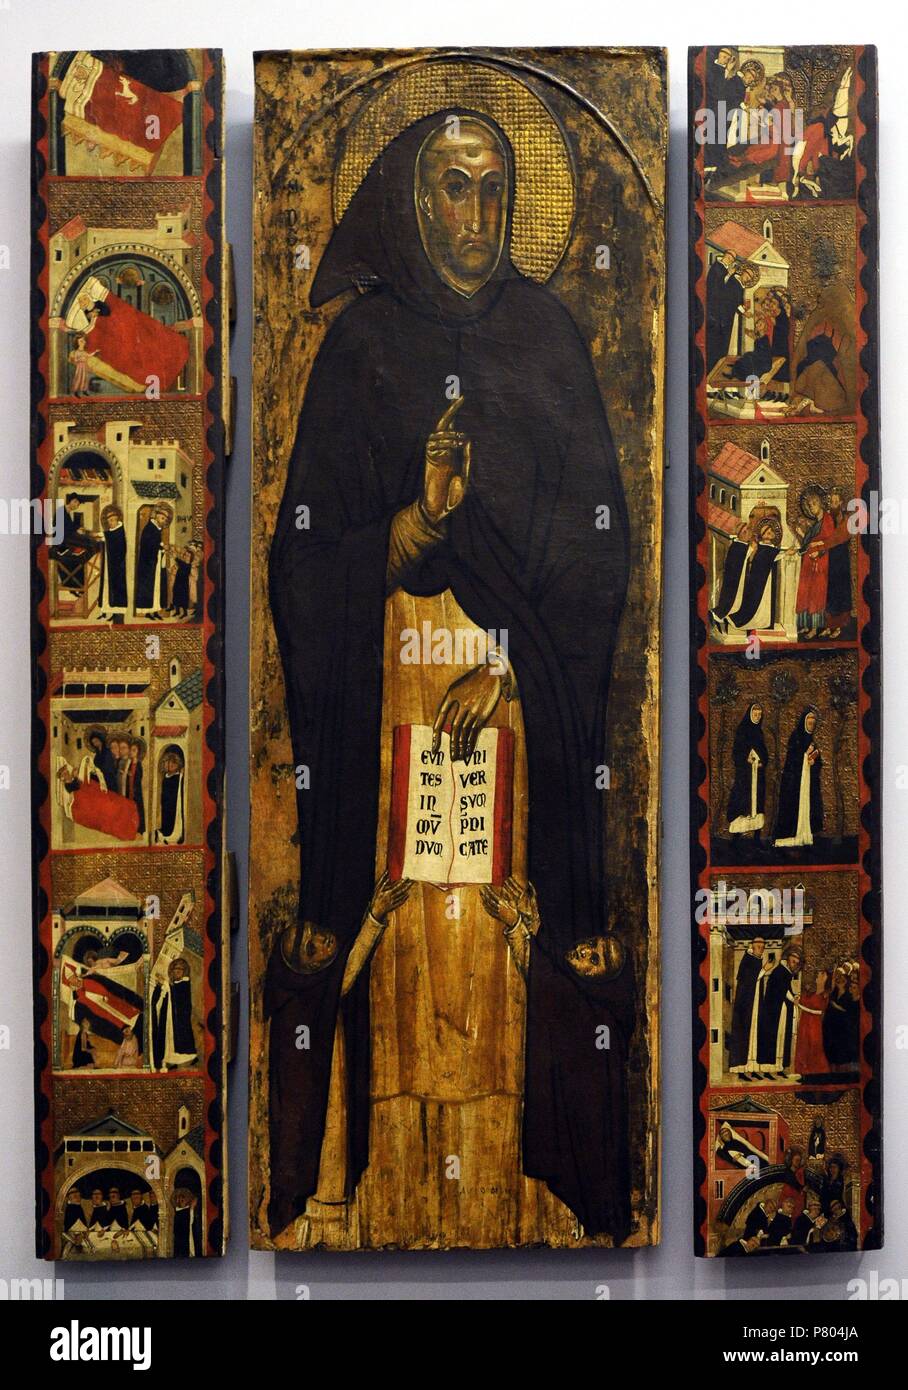 Attributed to Giovanni da Taranto (documented in 1304). Italian painter. Saint Dominic and the history of his life, about 1305. Triptych. Tempera on table. National Museum of Capodimonte. Naples. Italy. Stock Photo